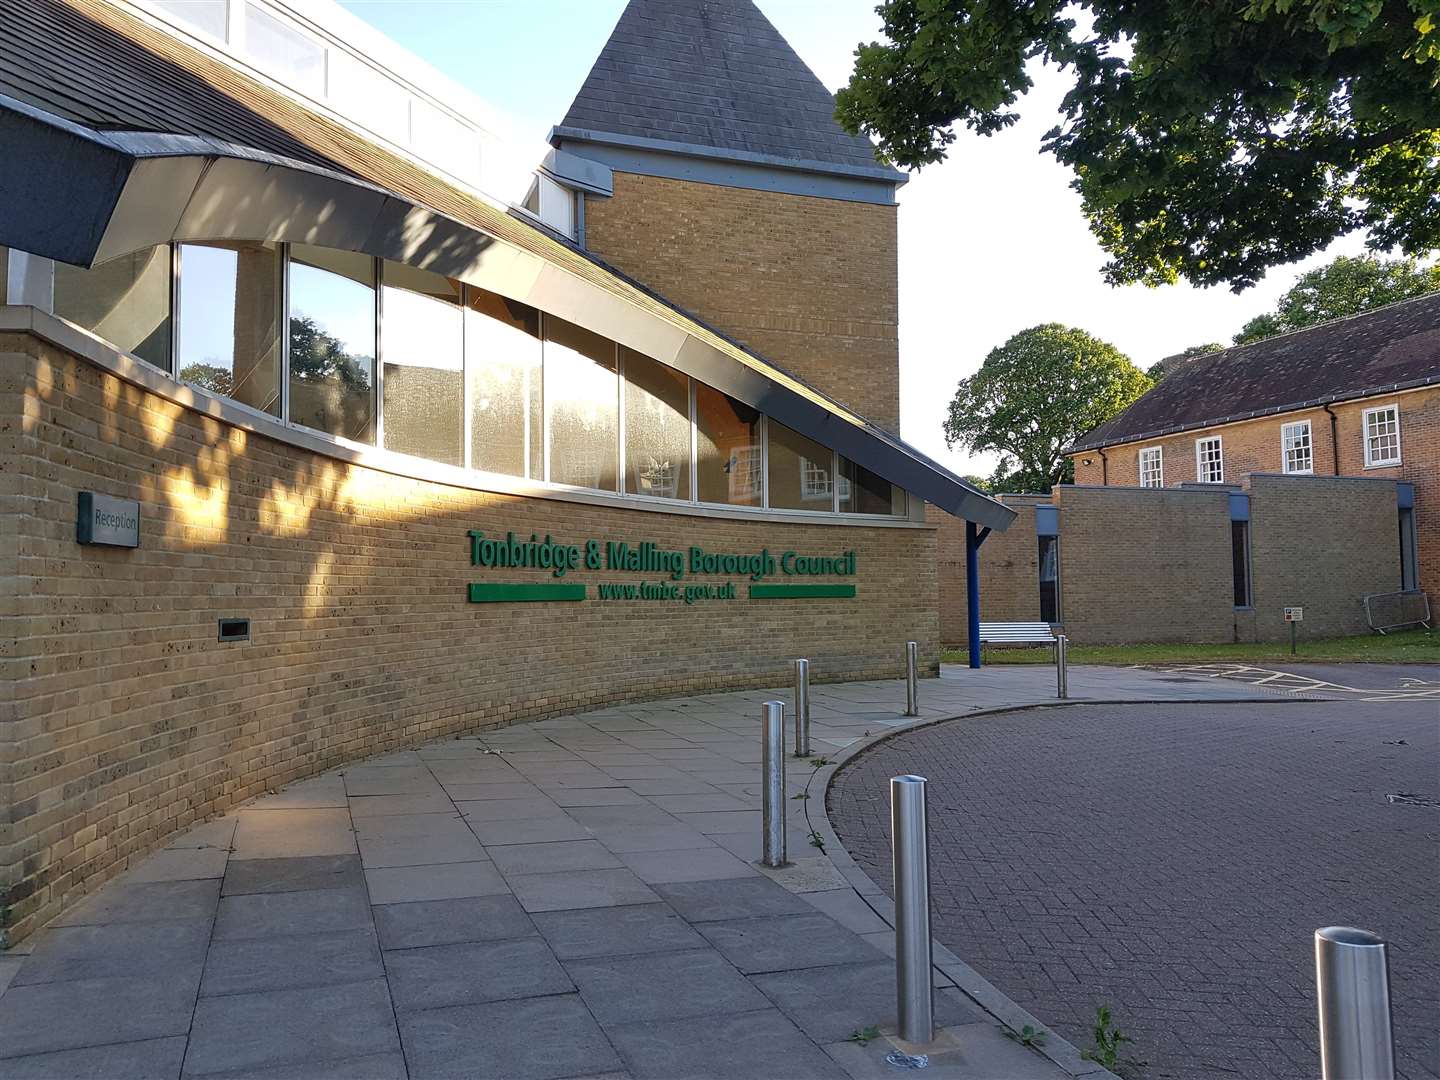 Tonbridge and Malling Borough Council declared a climate emergency in July